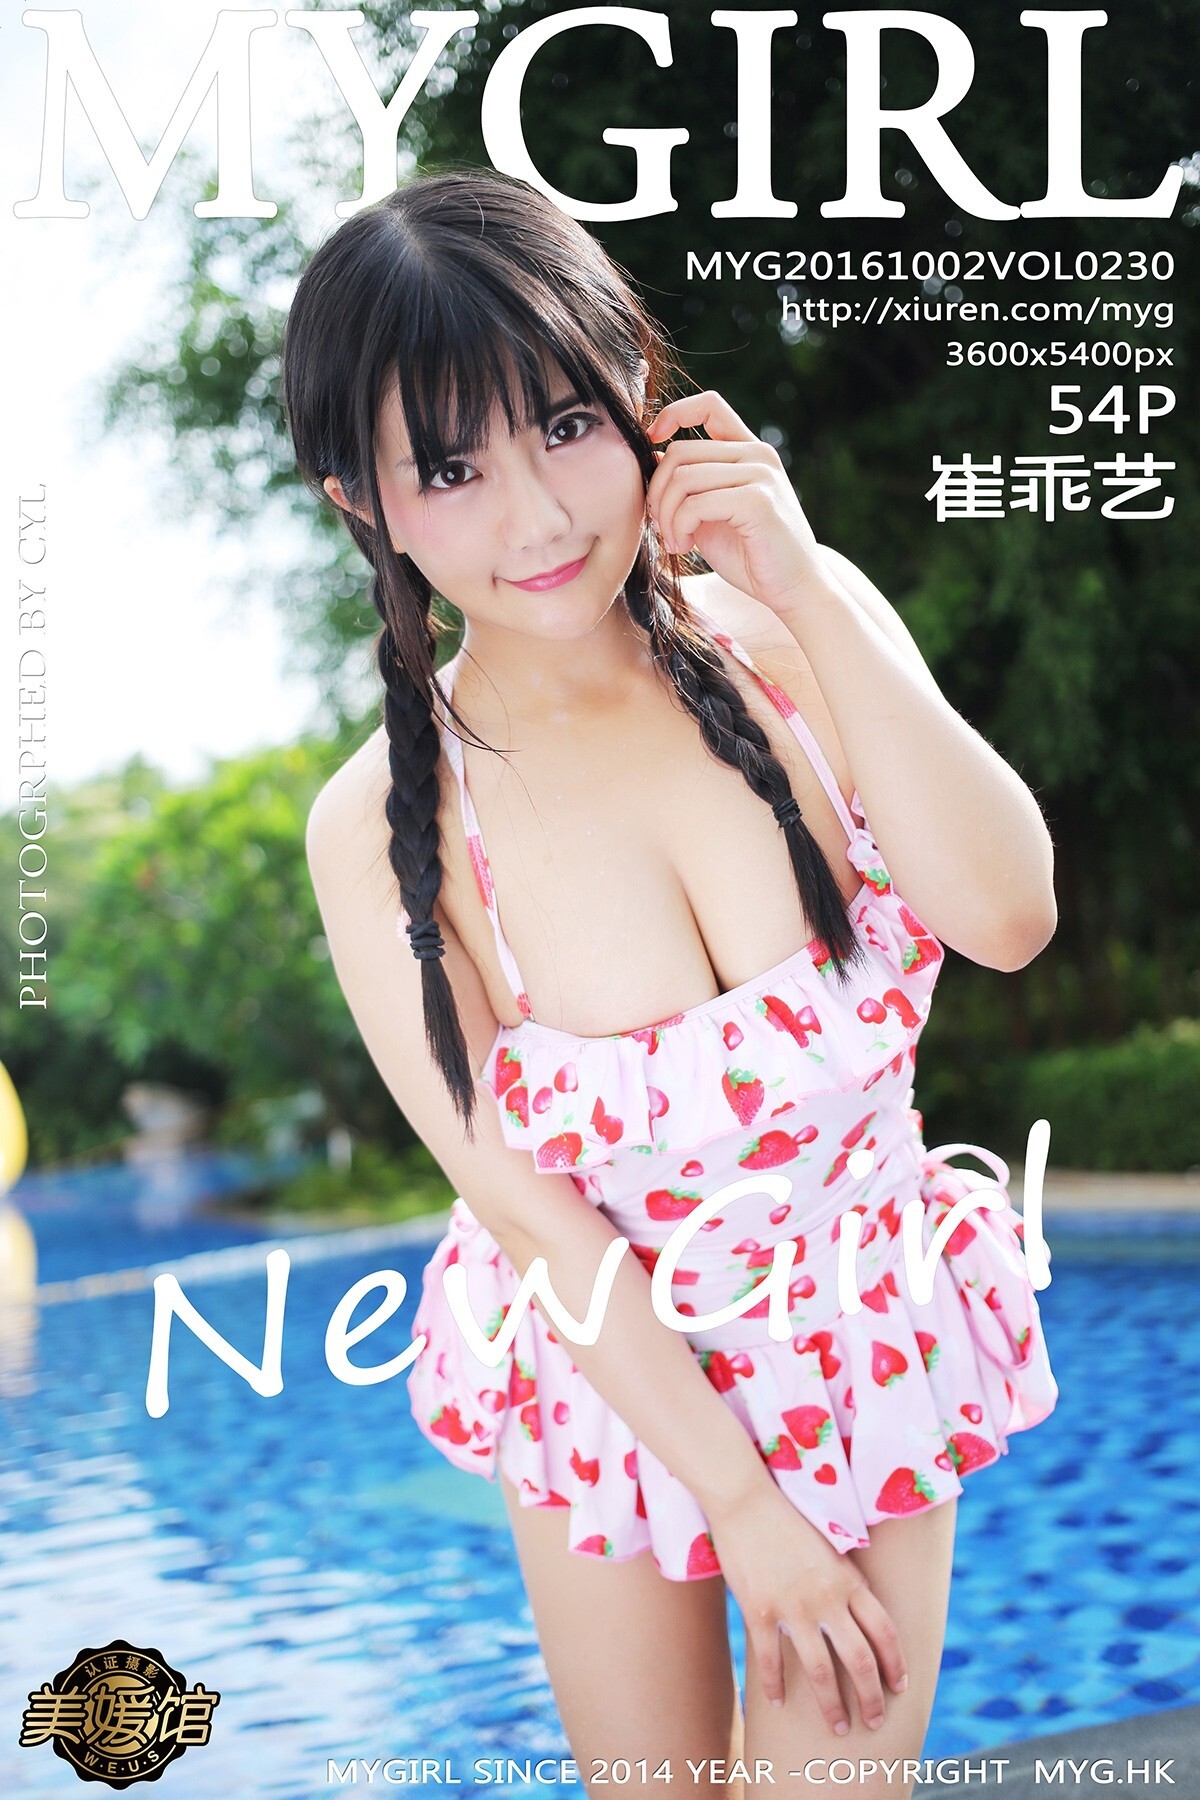 [mygirl] new special issue of Meiyuan Pavilion 2016-10-01 vol.230 Cui Guaiyi